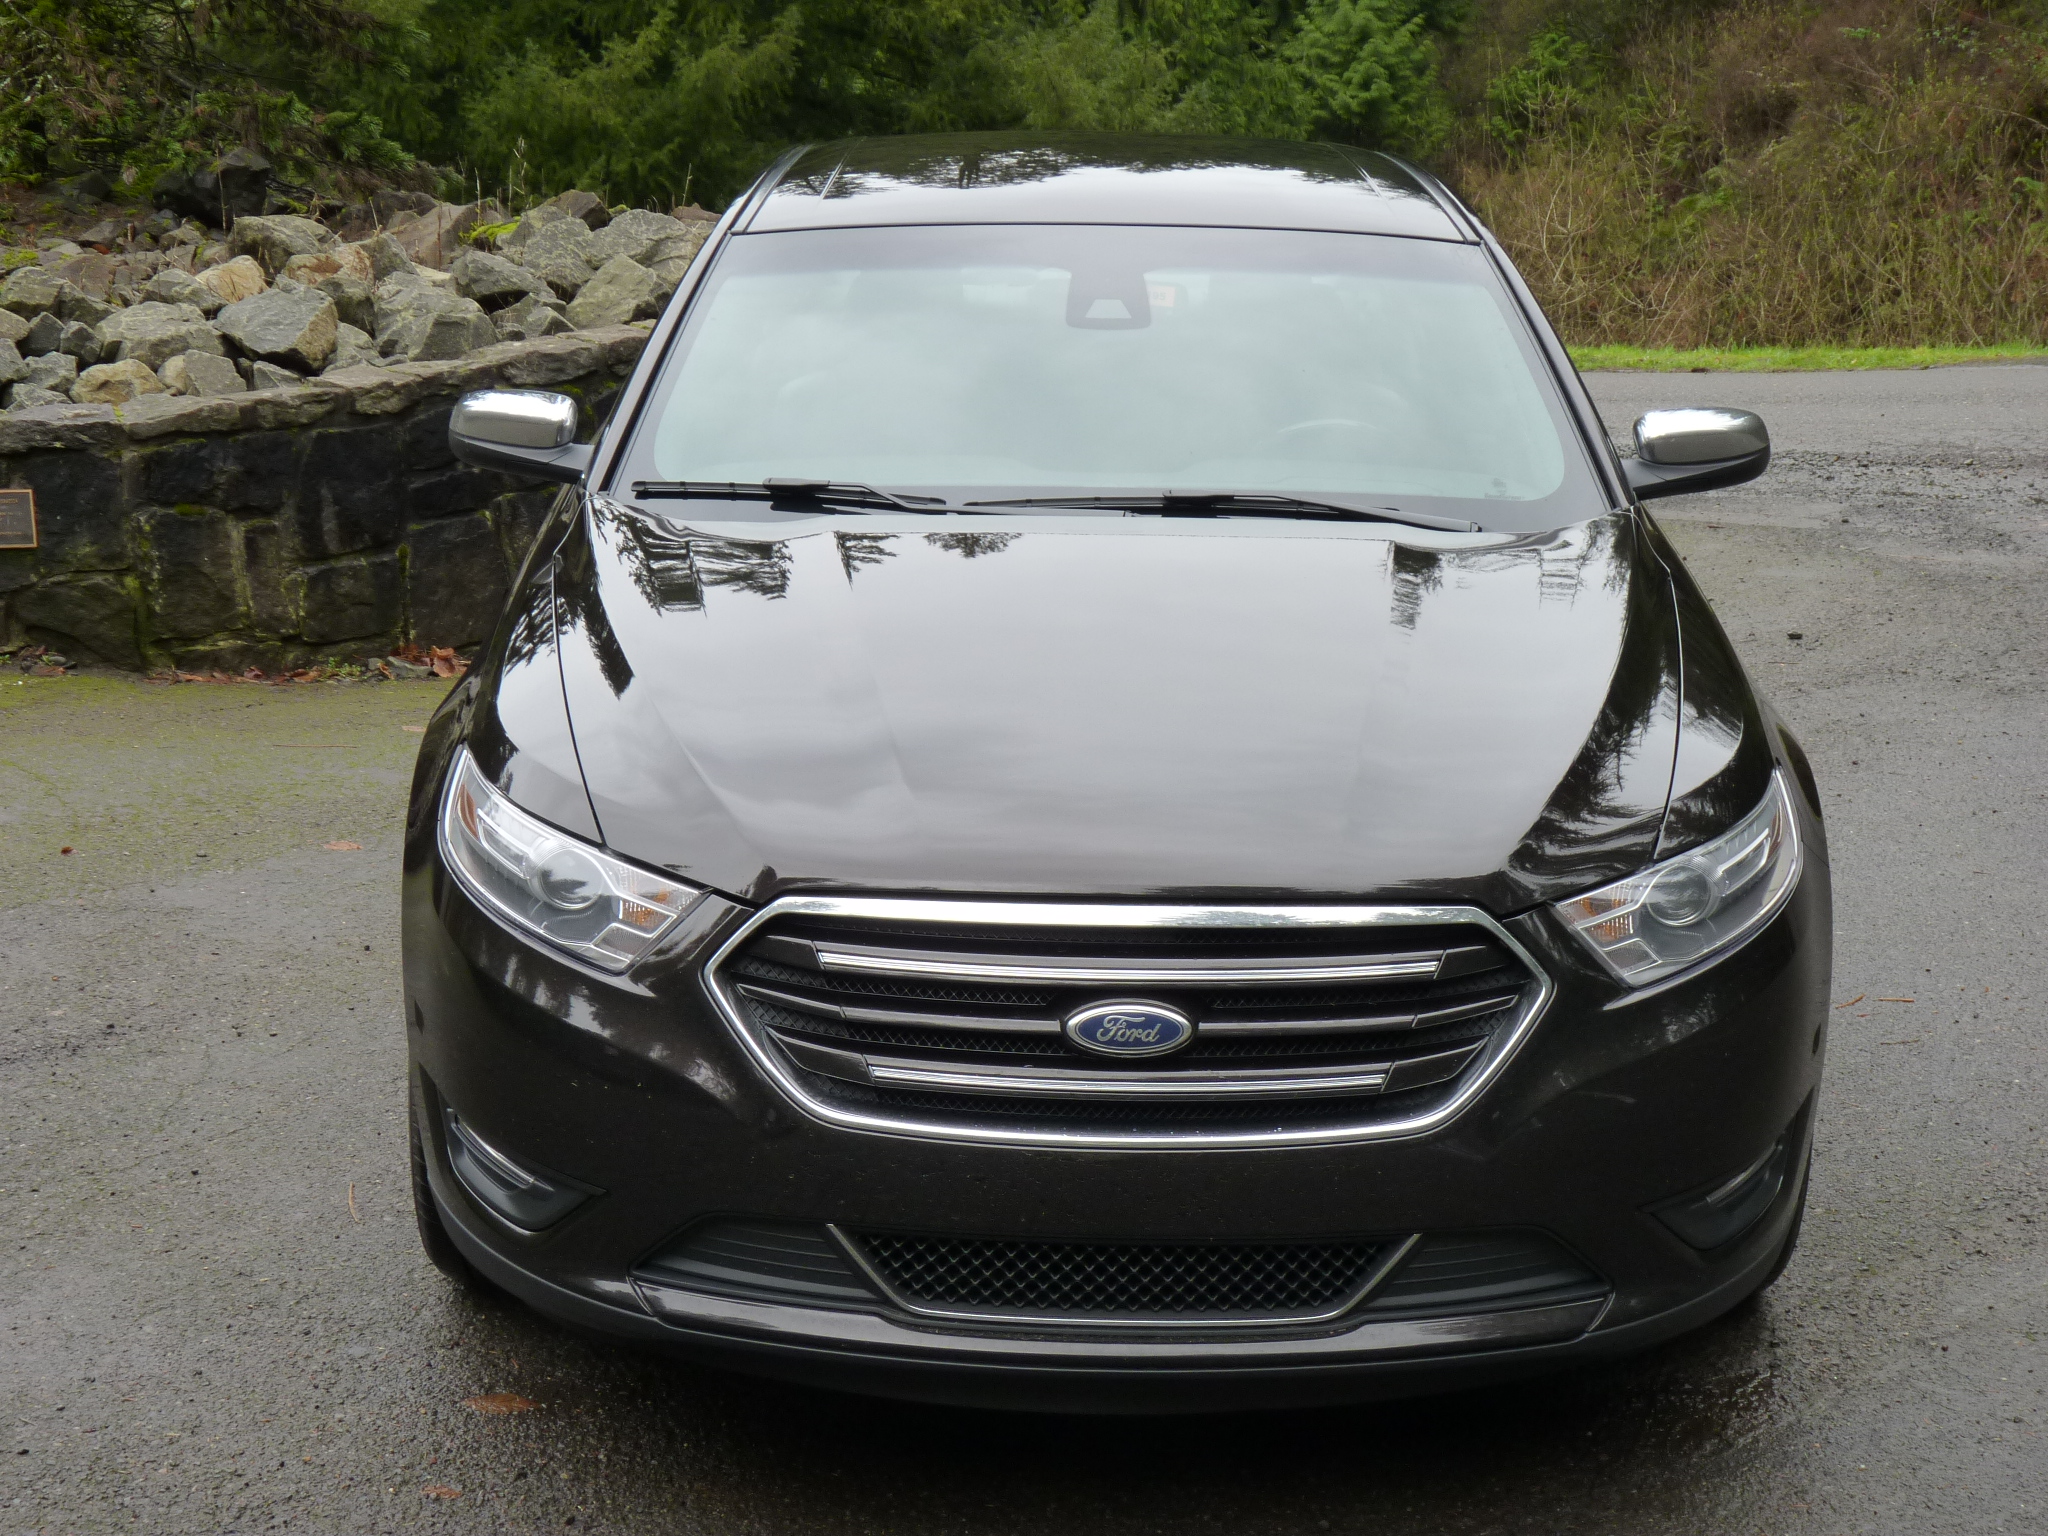 2013 Ford Taurus Ecoboost Gets 32 MPG Highway, 26 MPG Combined